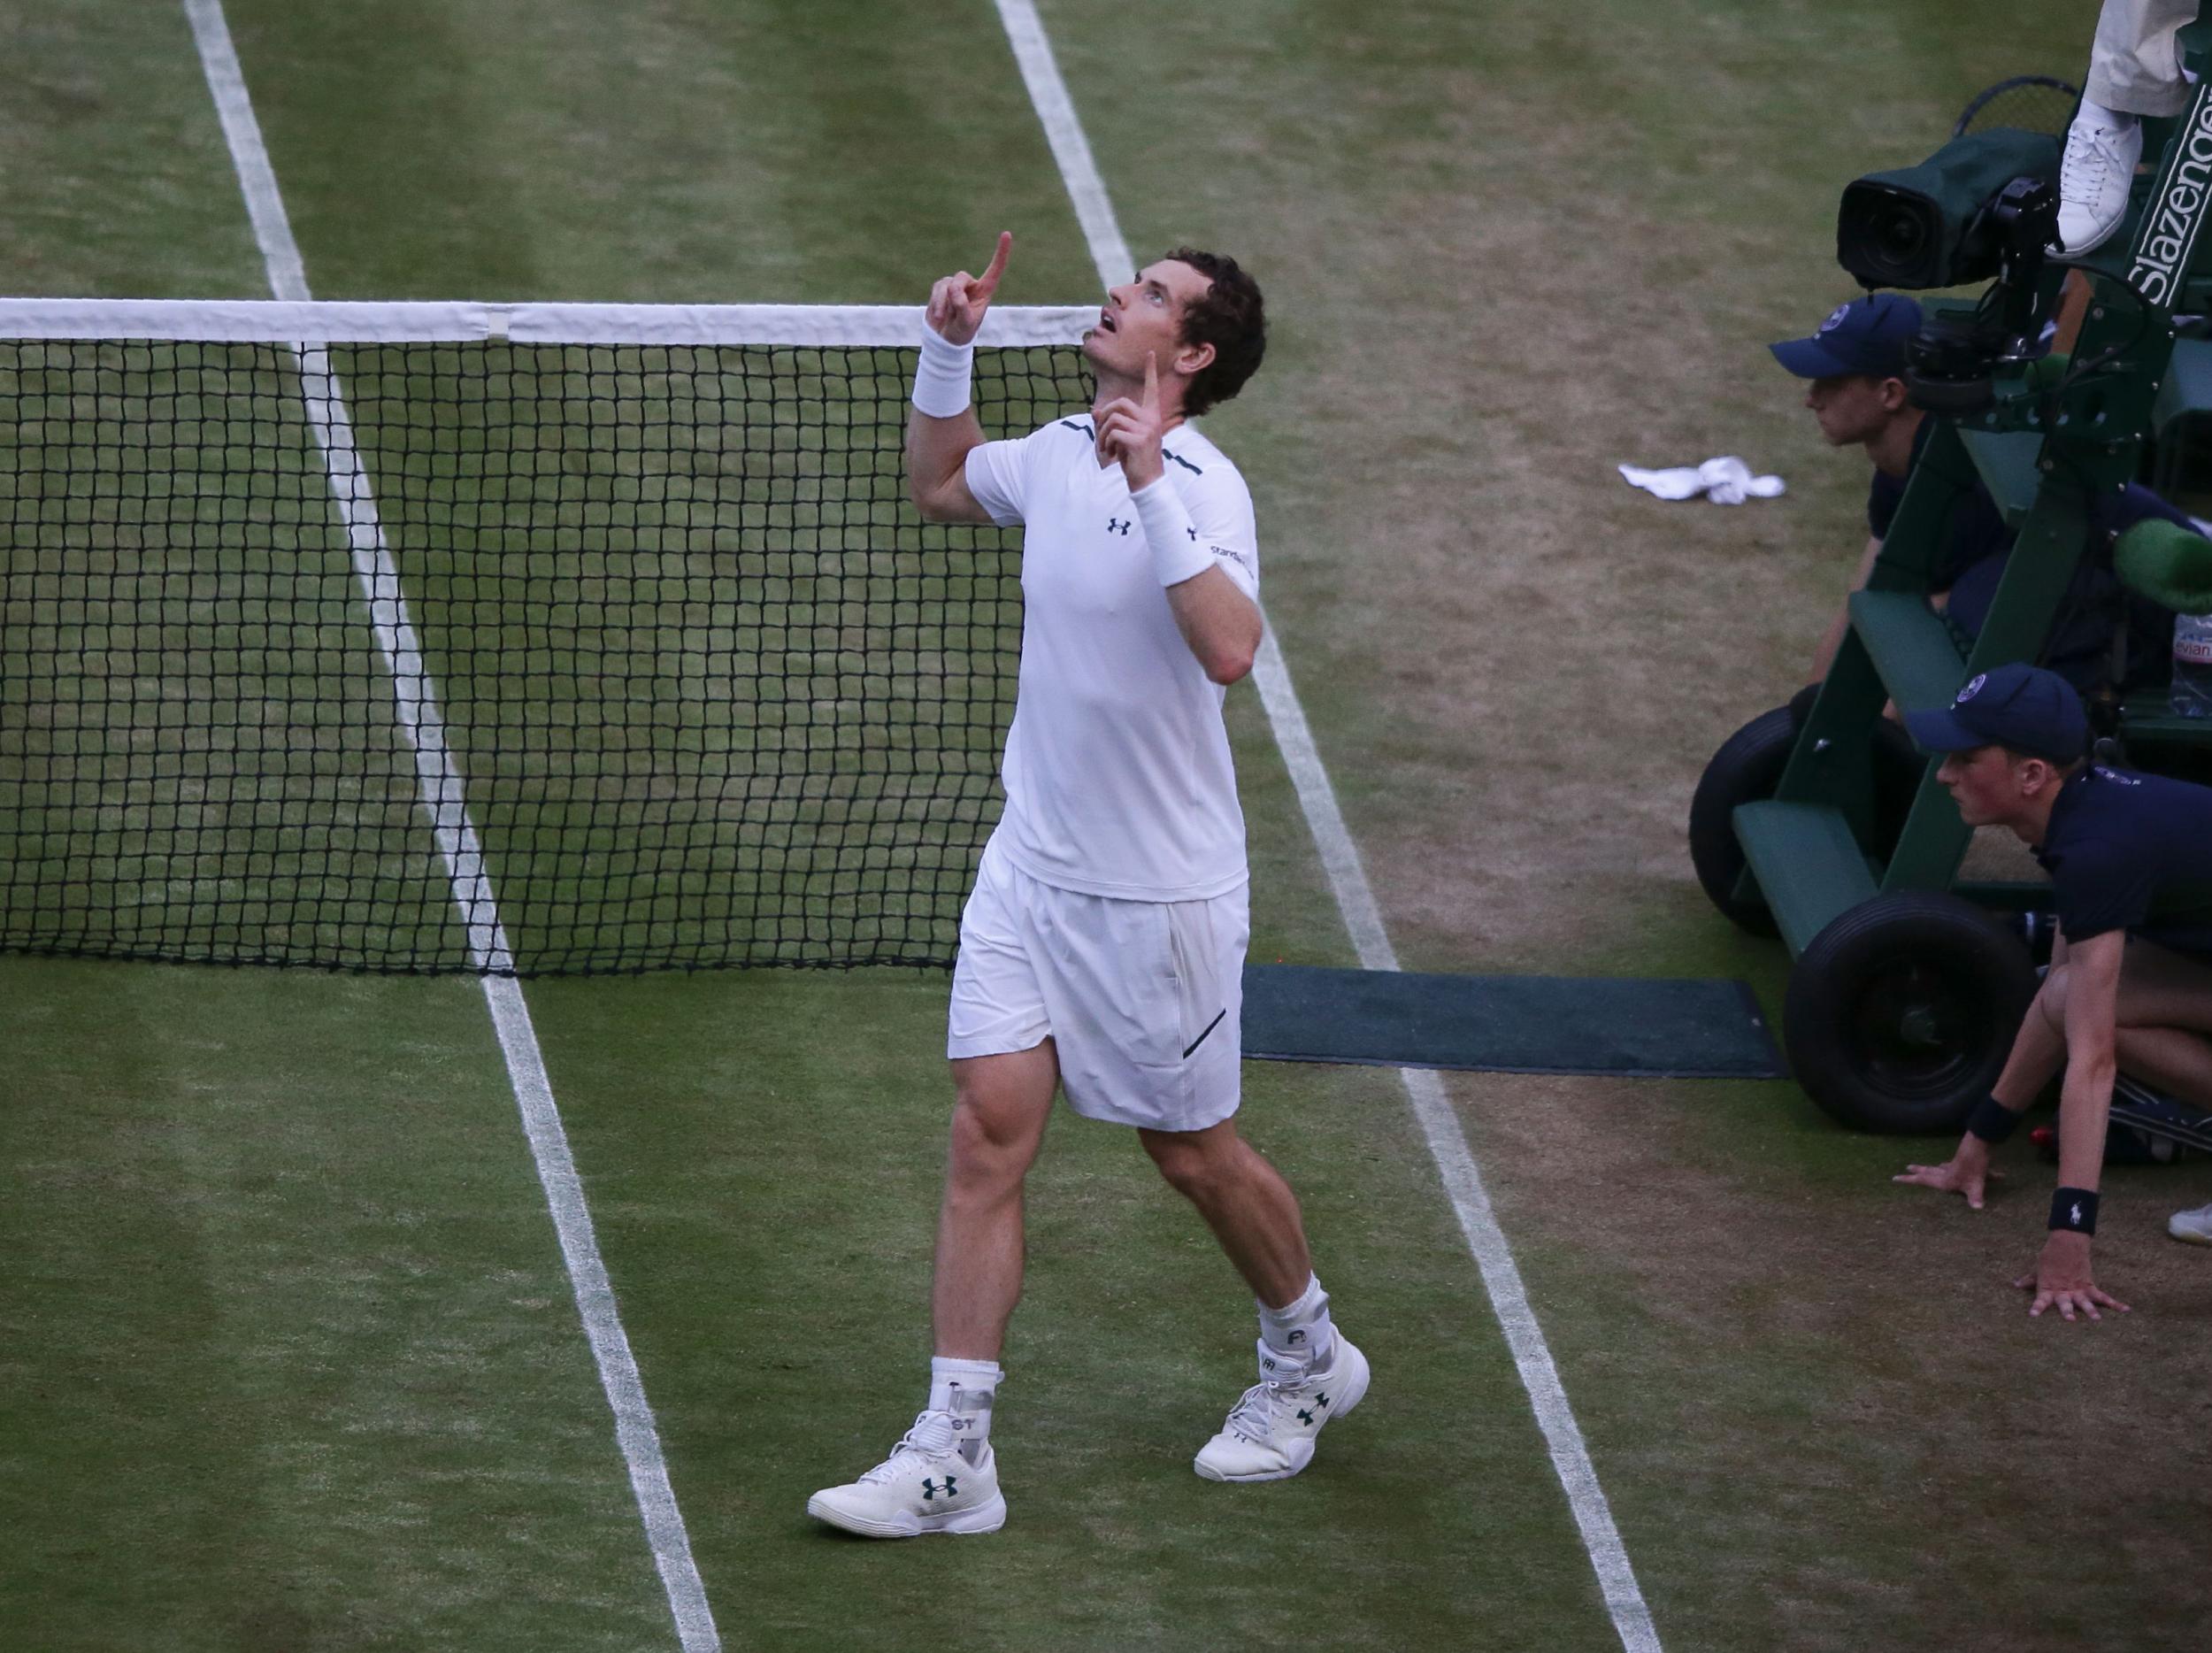 Murray has made it into the fourth round of Wimbledon